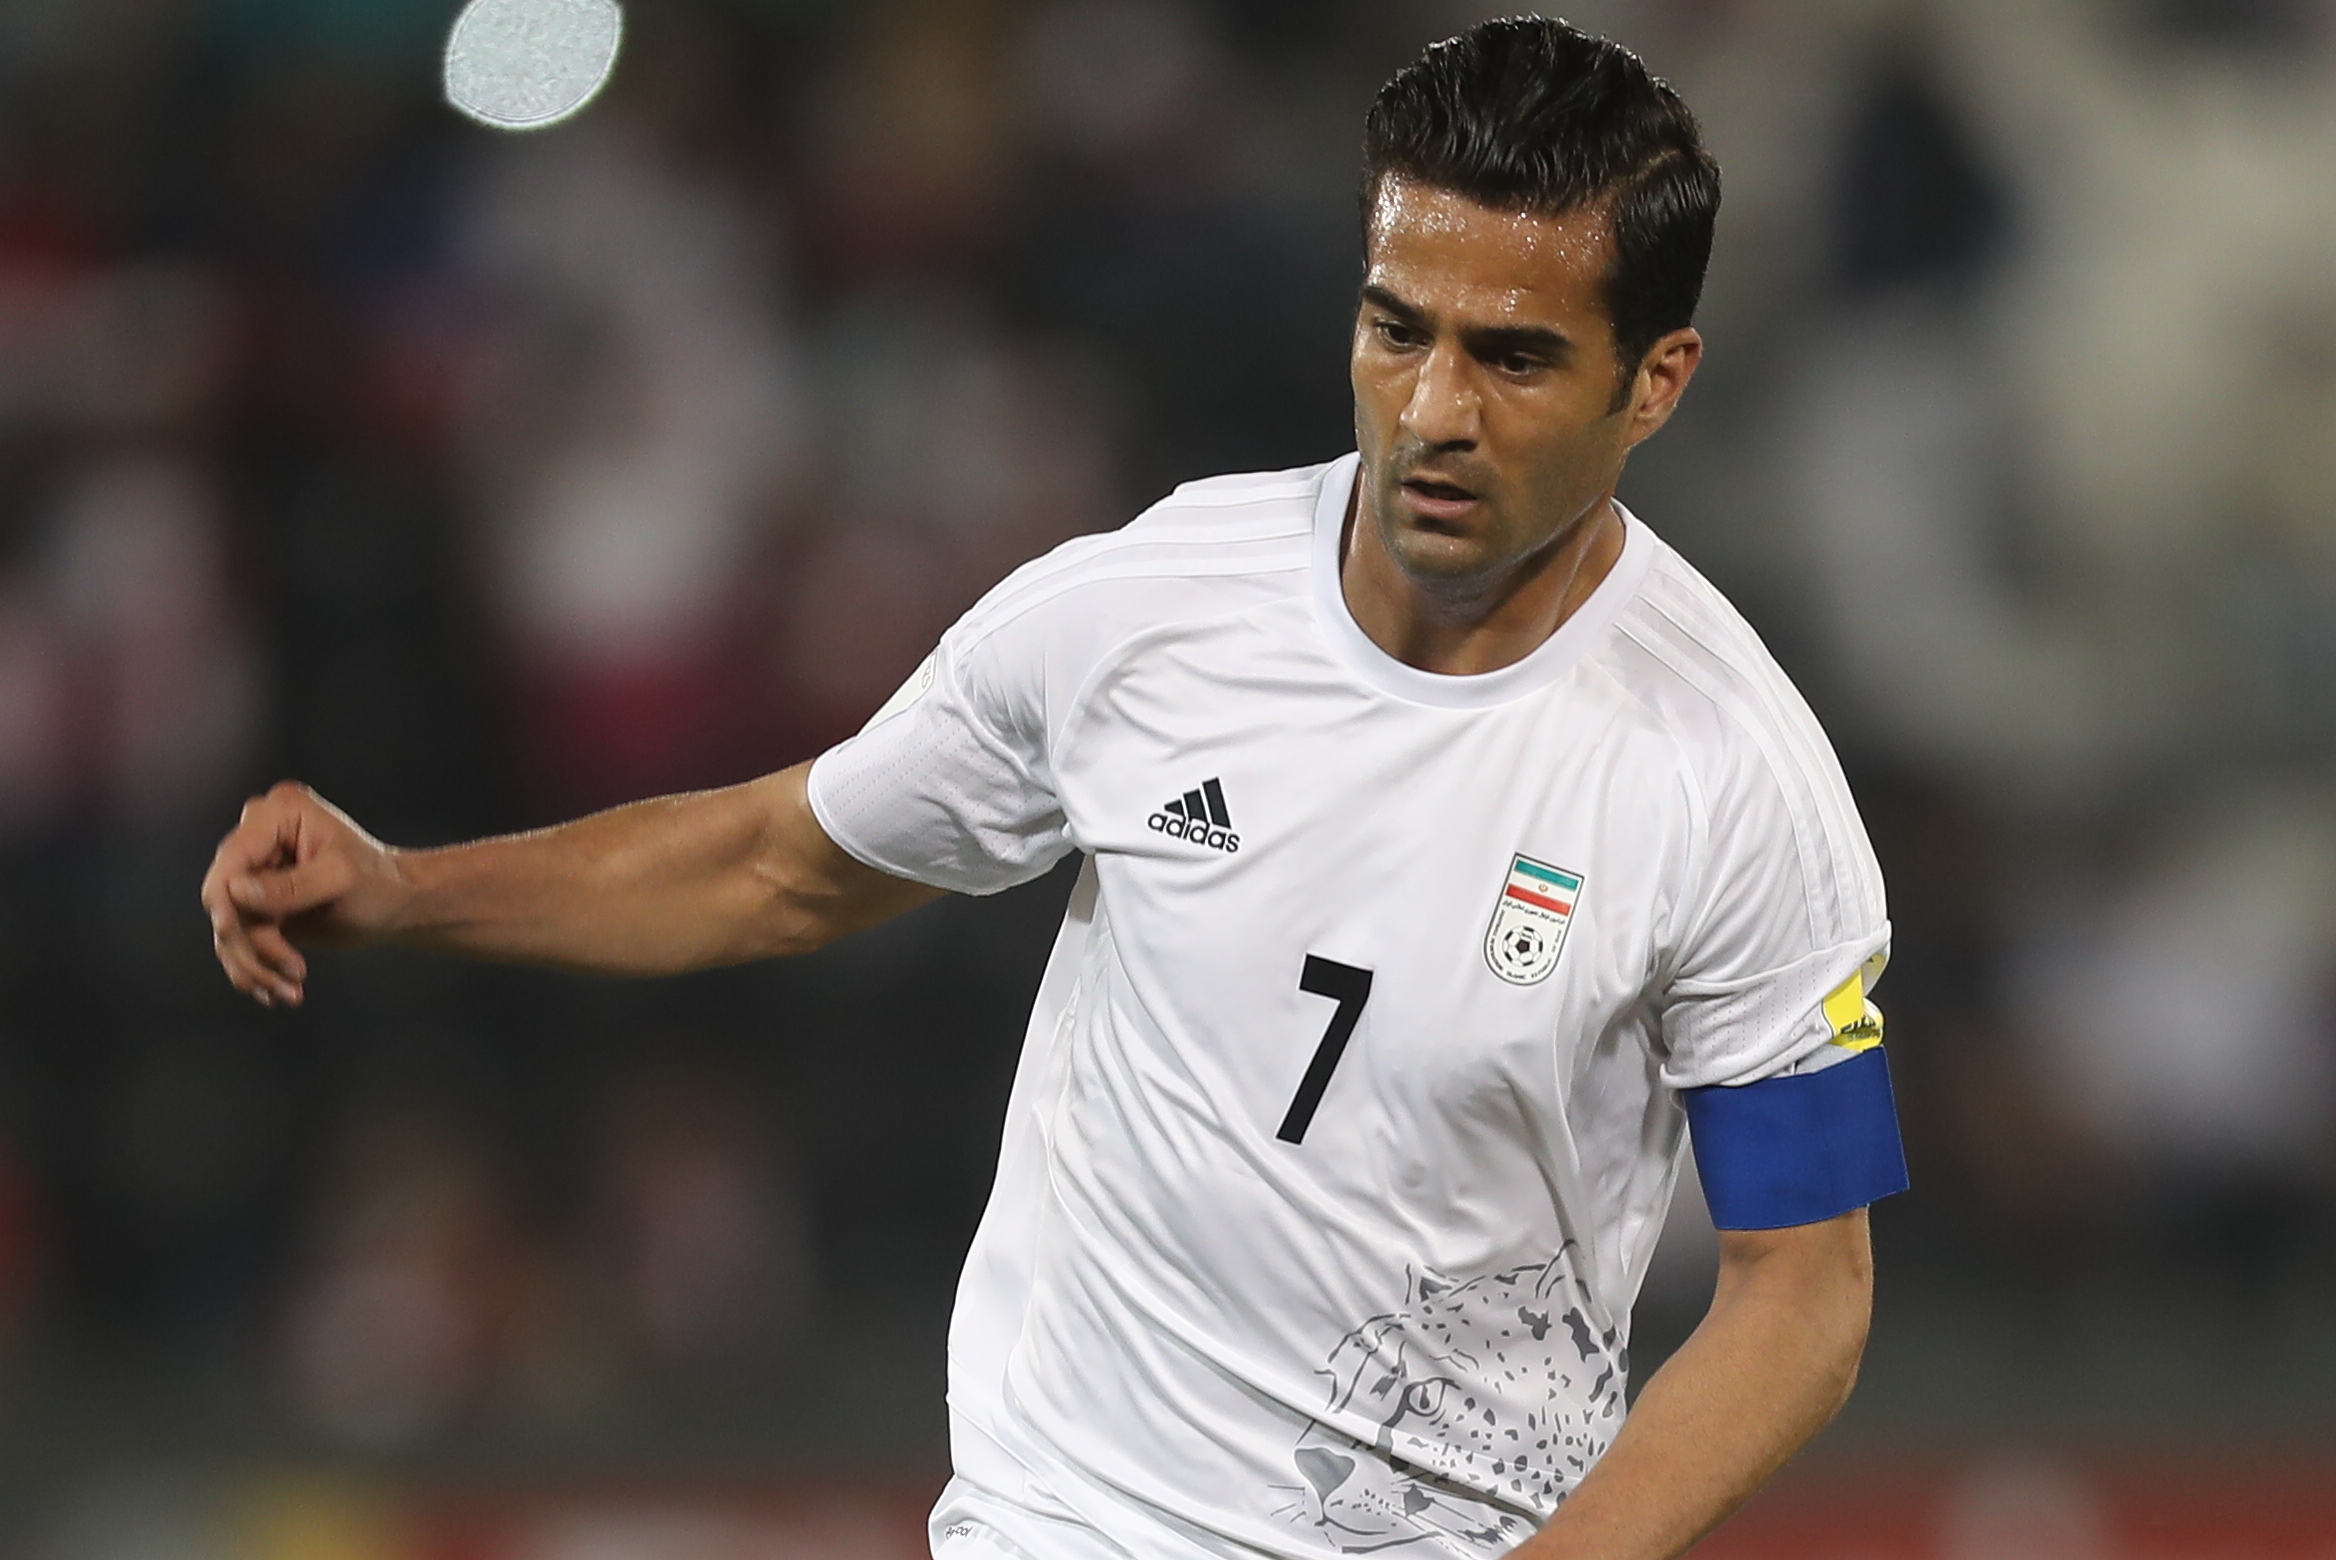 Iran Team Players Banned for Life for Facing Club | News, Scores, Highlights, Stats, Rumors | Bleacher Report